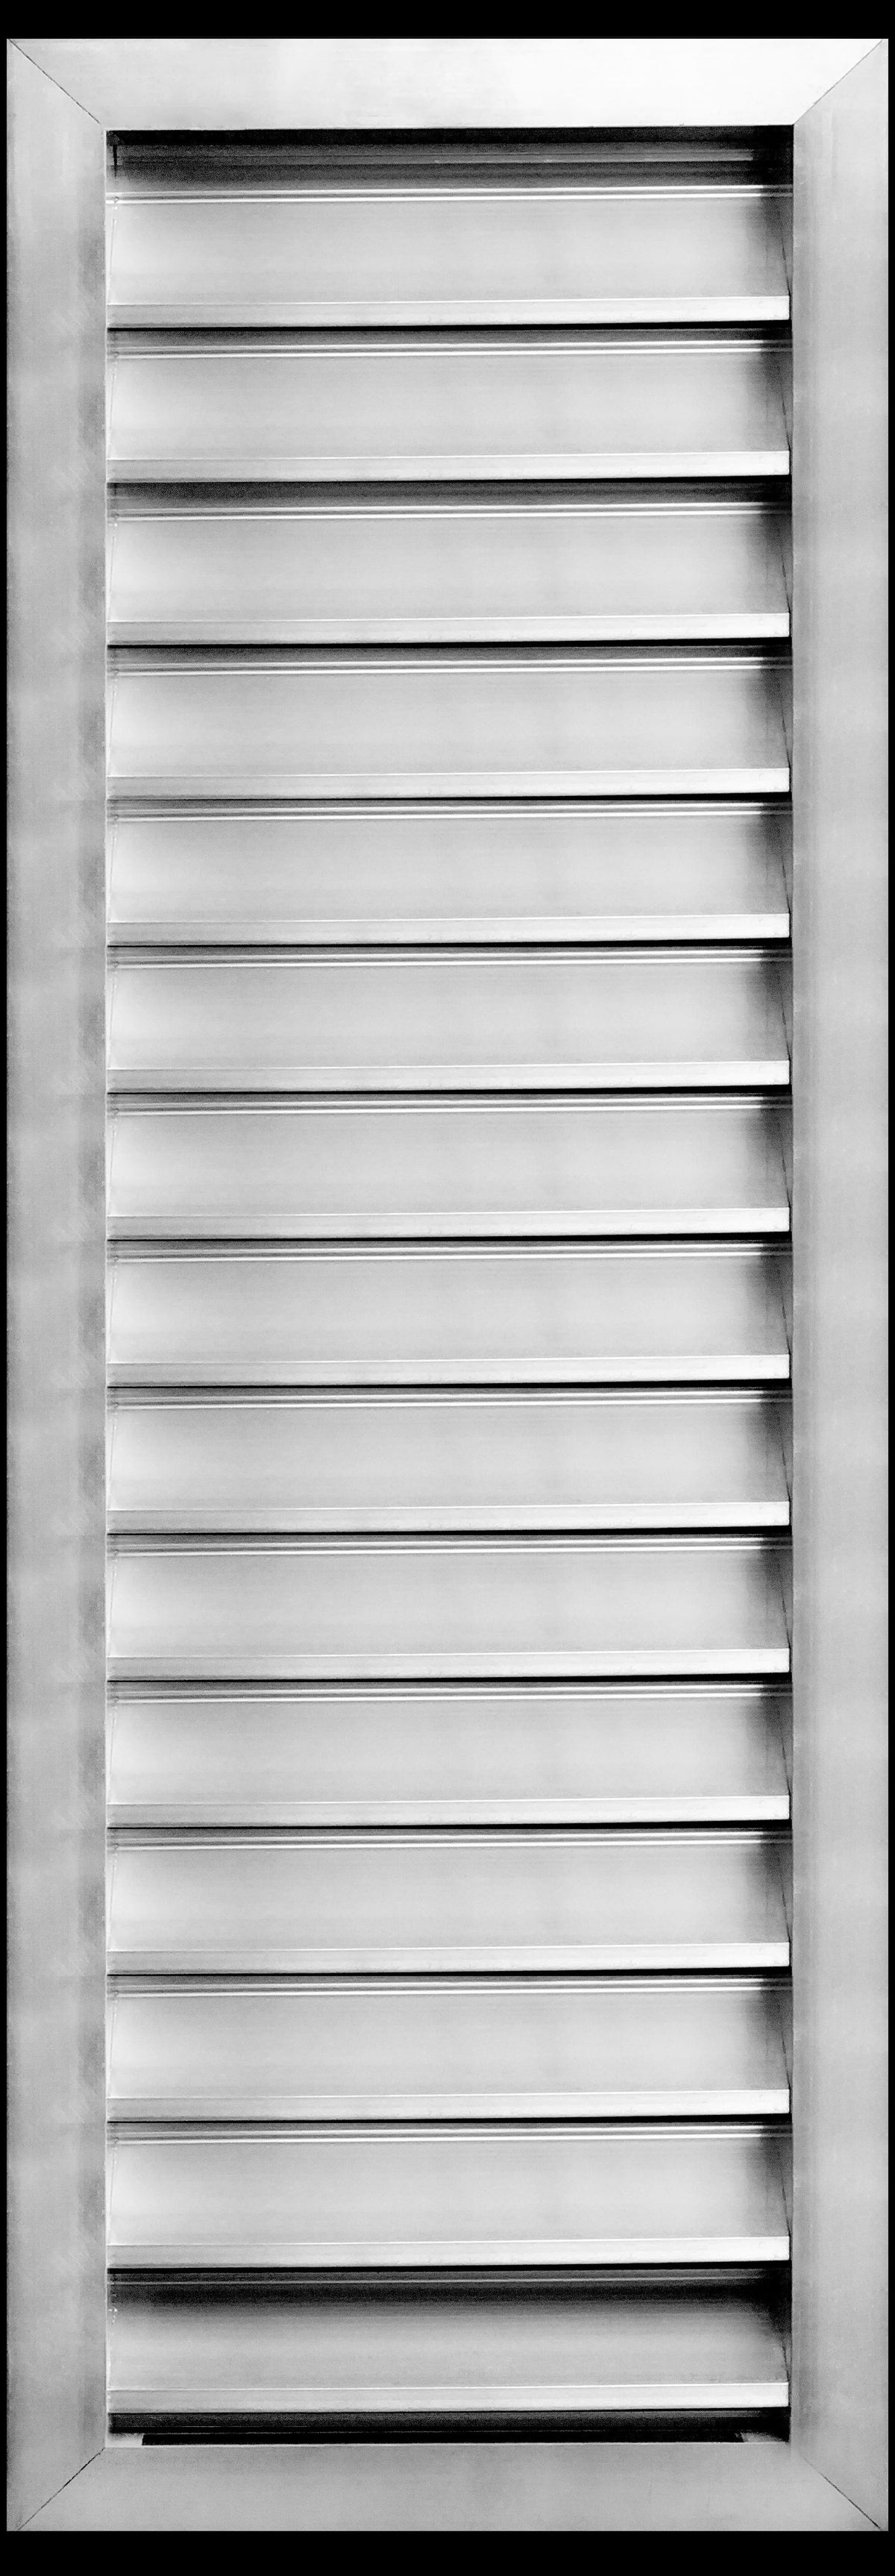 10&quot;w X 36&quot;h Aluminum Outdoor Weather Proof Louvers - Rain &amp; Waterproof Air Vent With Screen Mesh